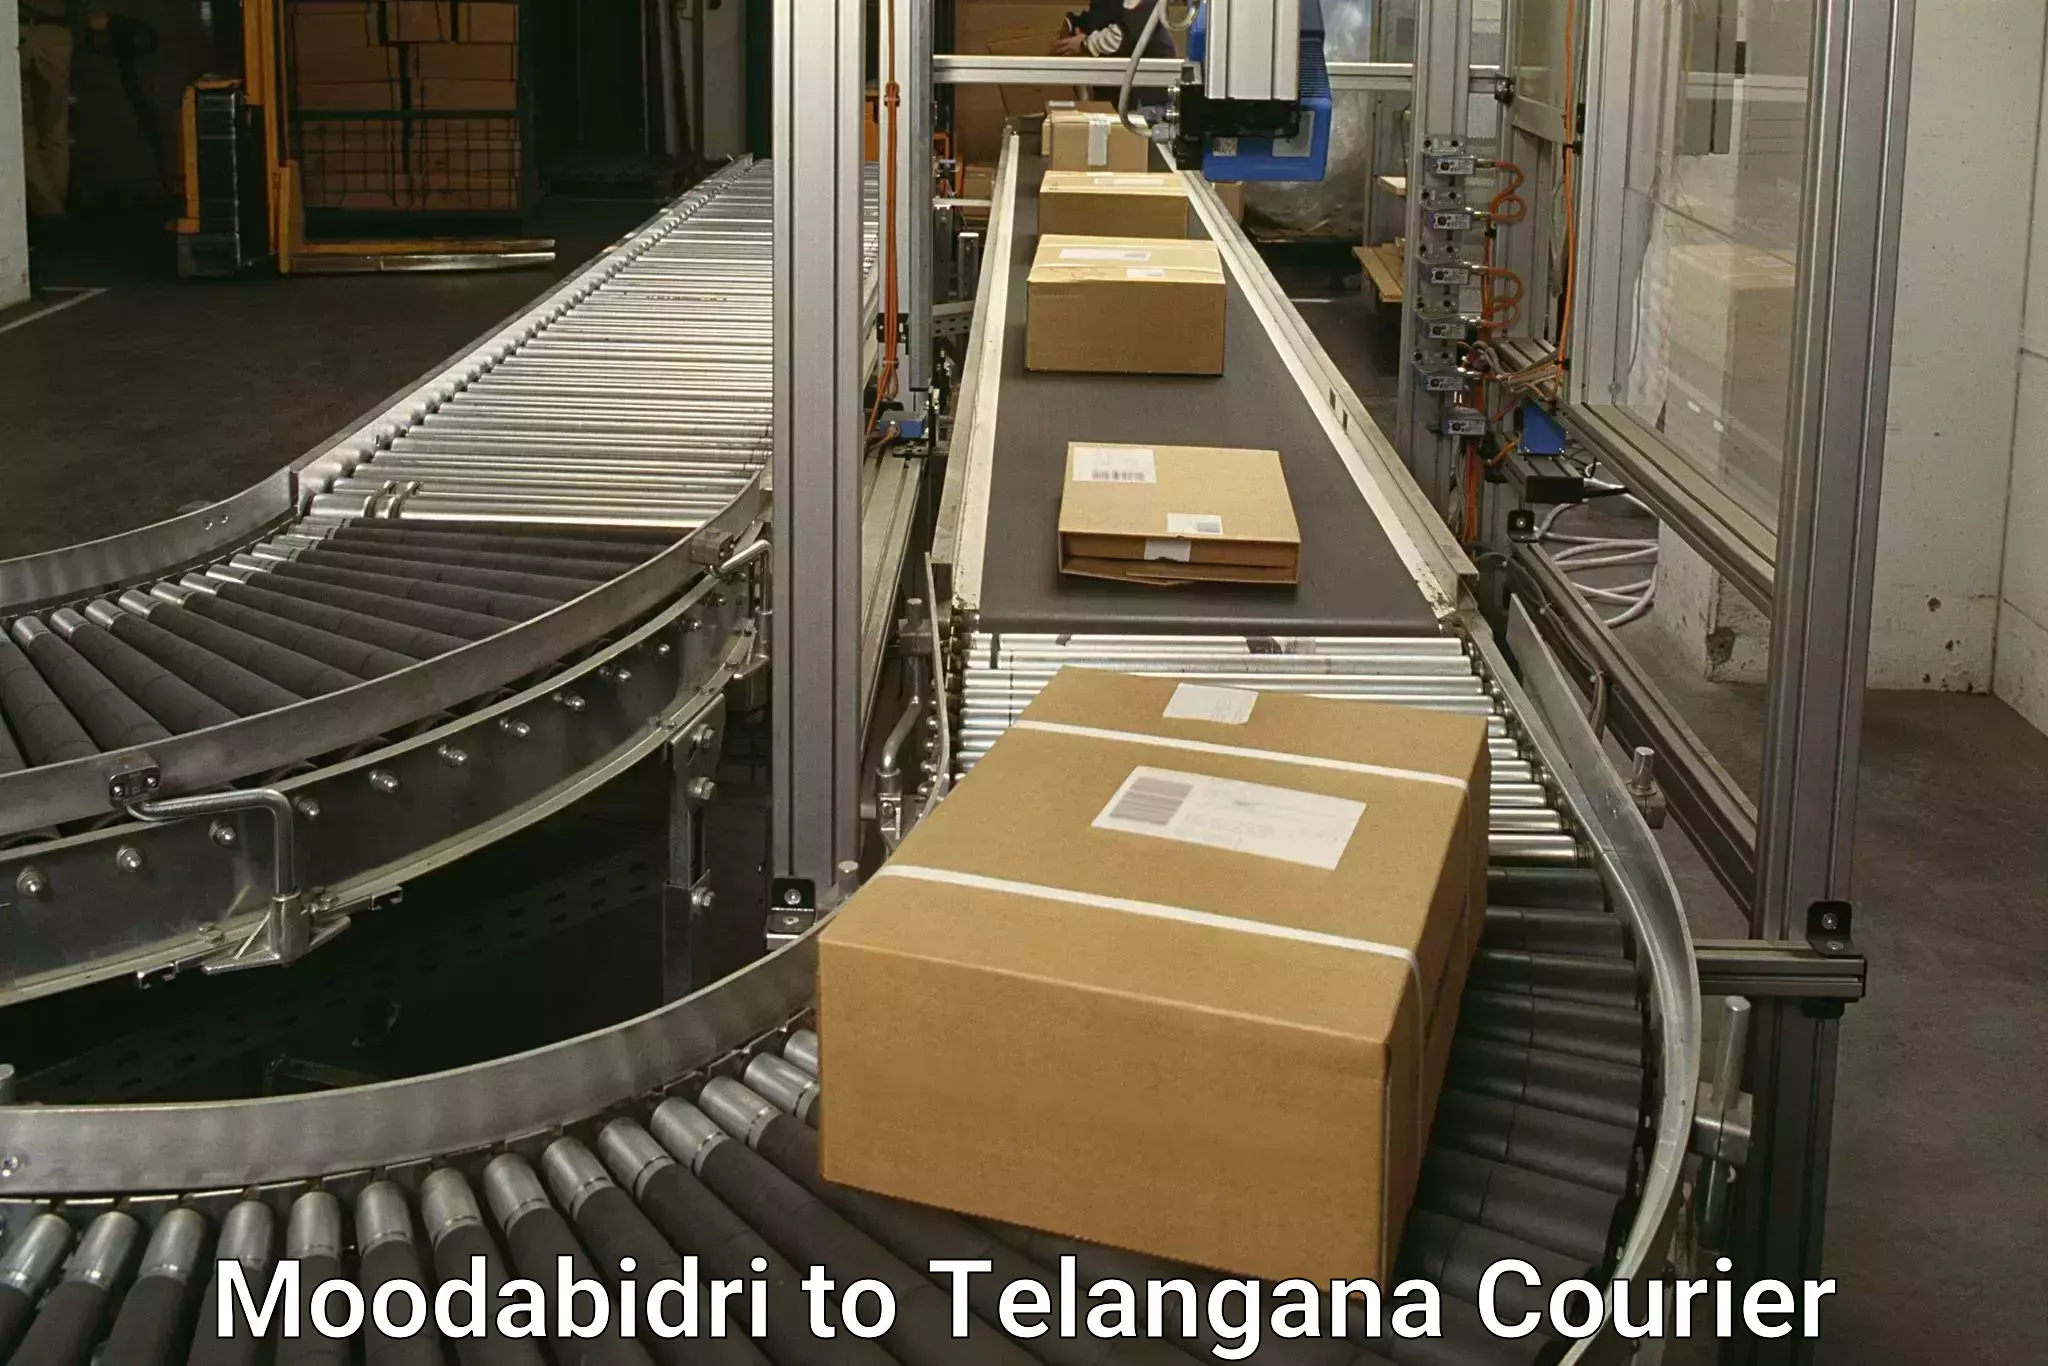 Online package tracking Moodabidri to Sultanabad